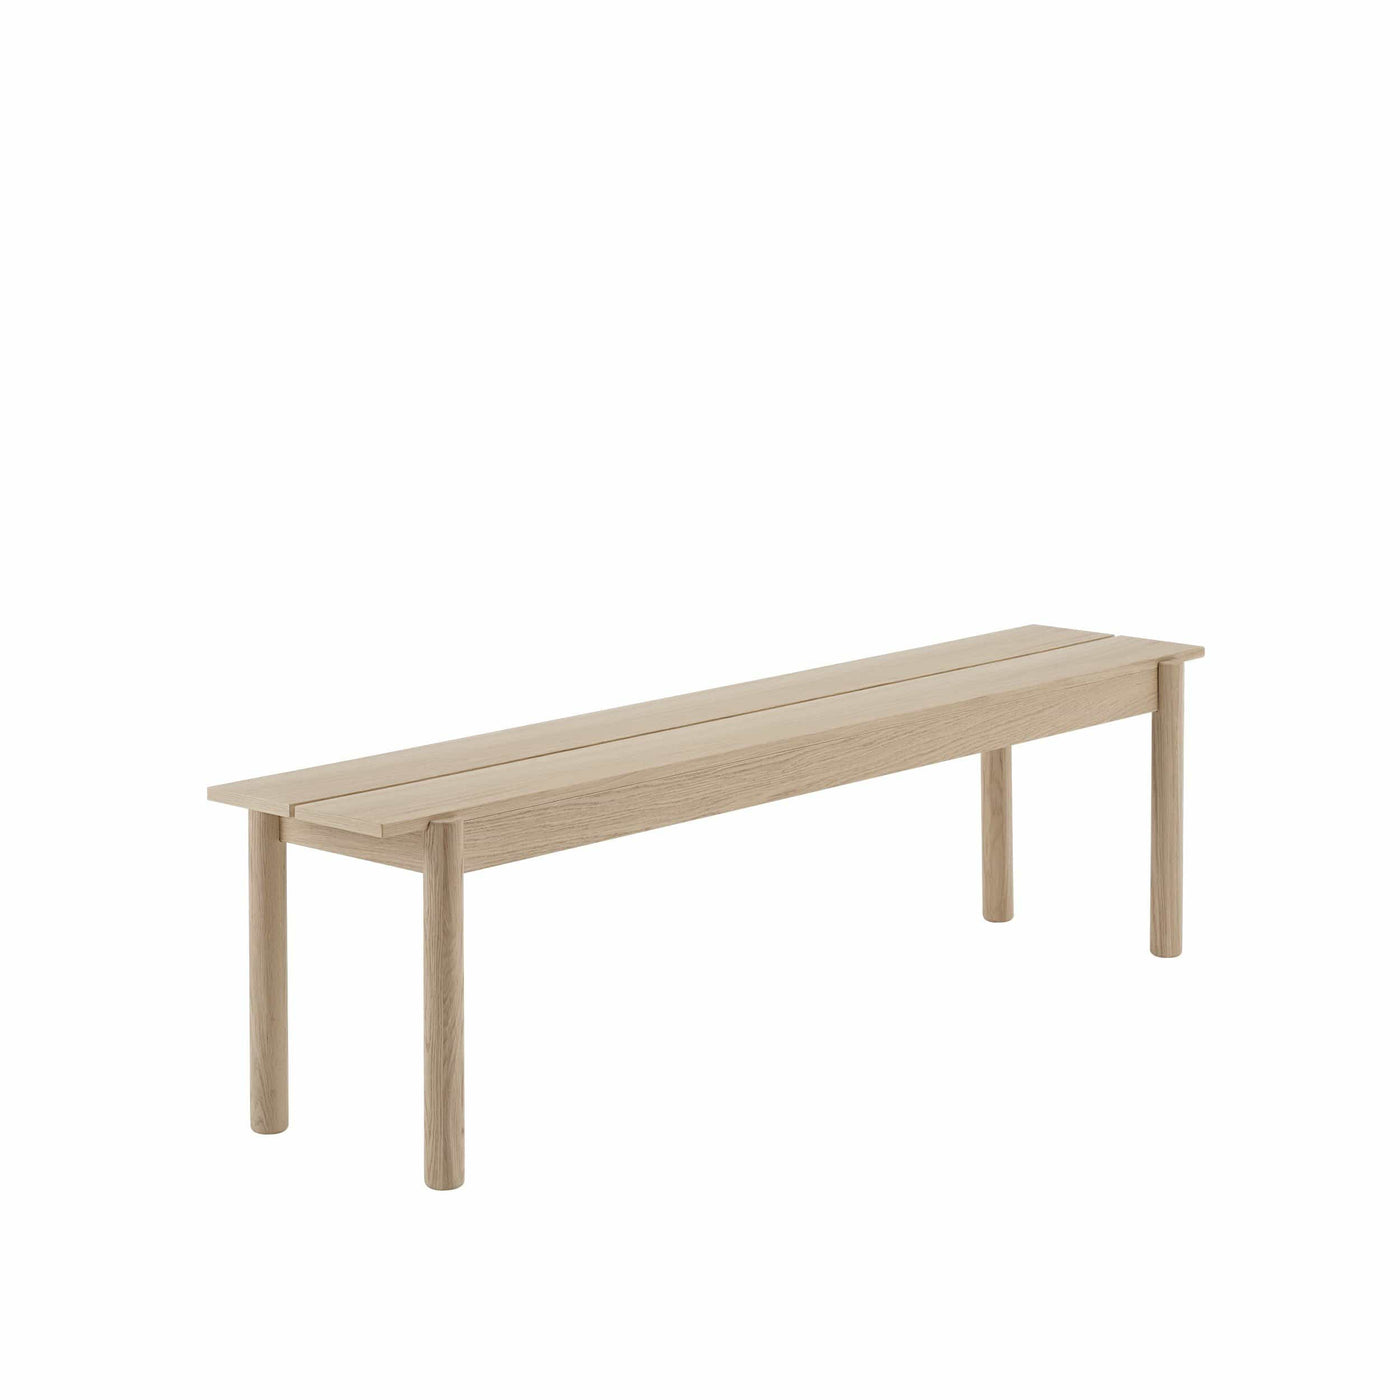 Muuto Linear Wood Bench in oak 34x170cm, available from someday designs. #size_34x170